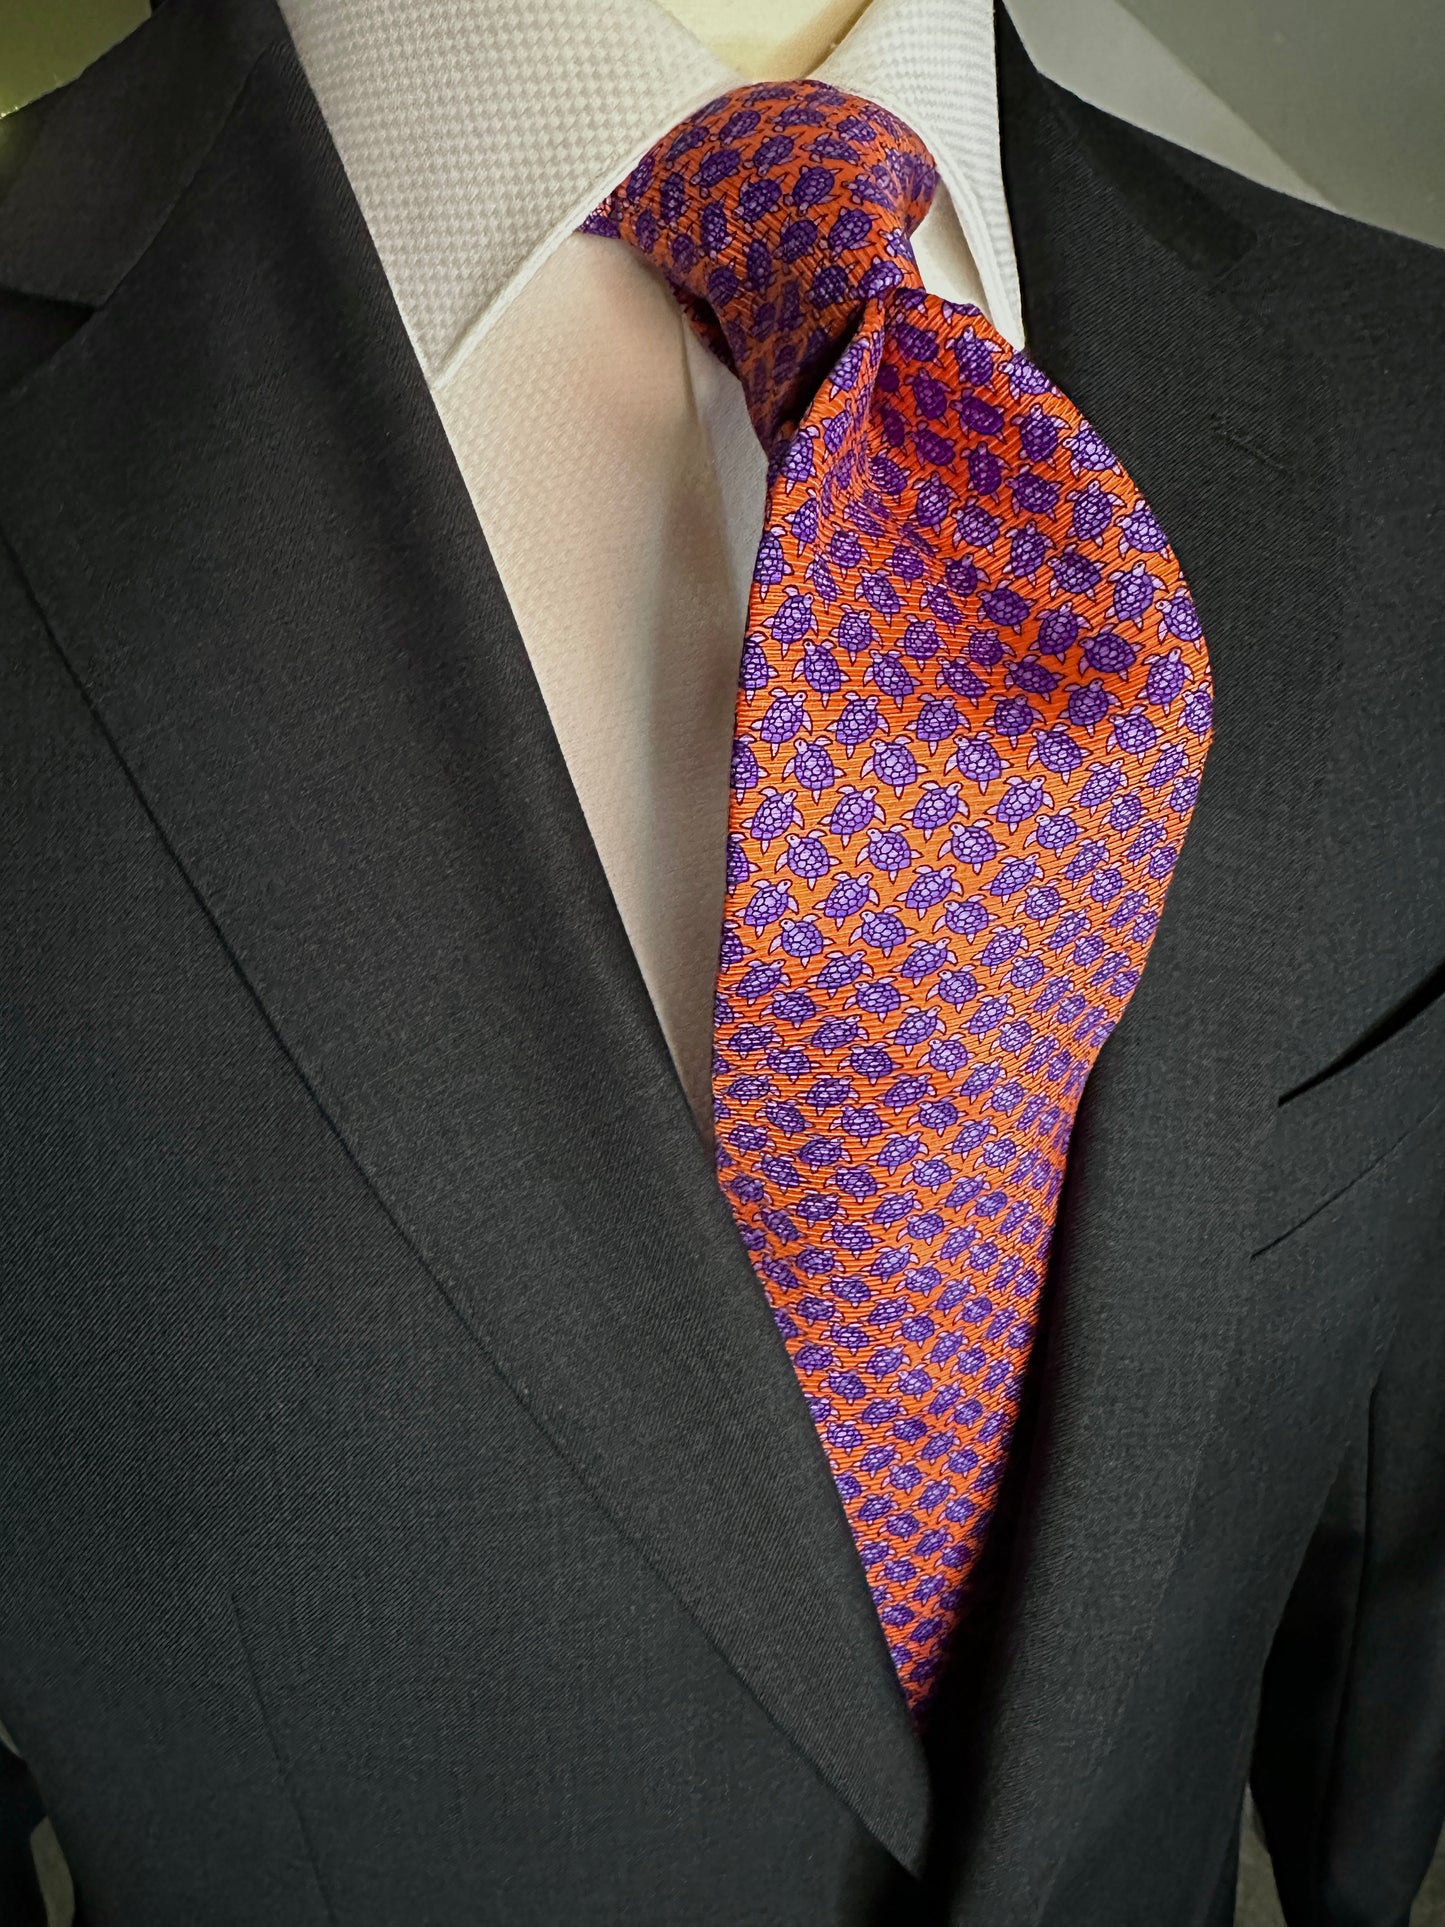 A tie with turtles, what could be better? You don't see turtles? This beautiful geometric pattern is made of closely bunched turtles in purple against an orange background. What is so great about this tie is that from afar this necktie is a neat pattern, but as you get closer it can be seen there are small turtles together. Hermes style. 